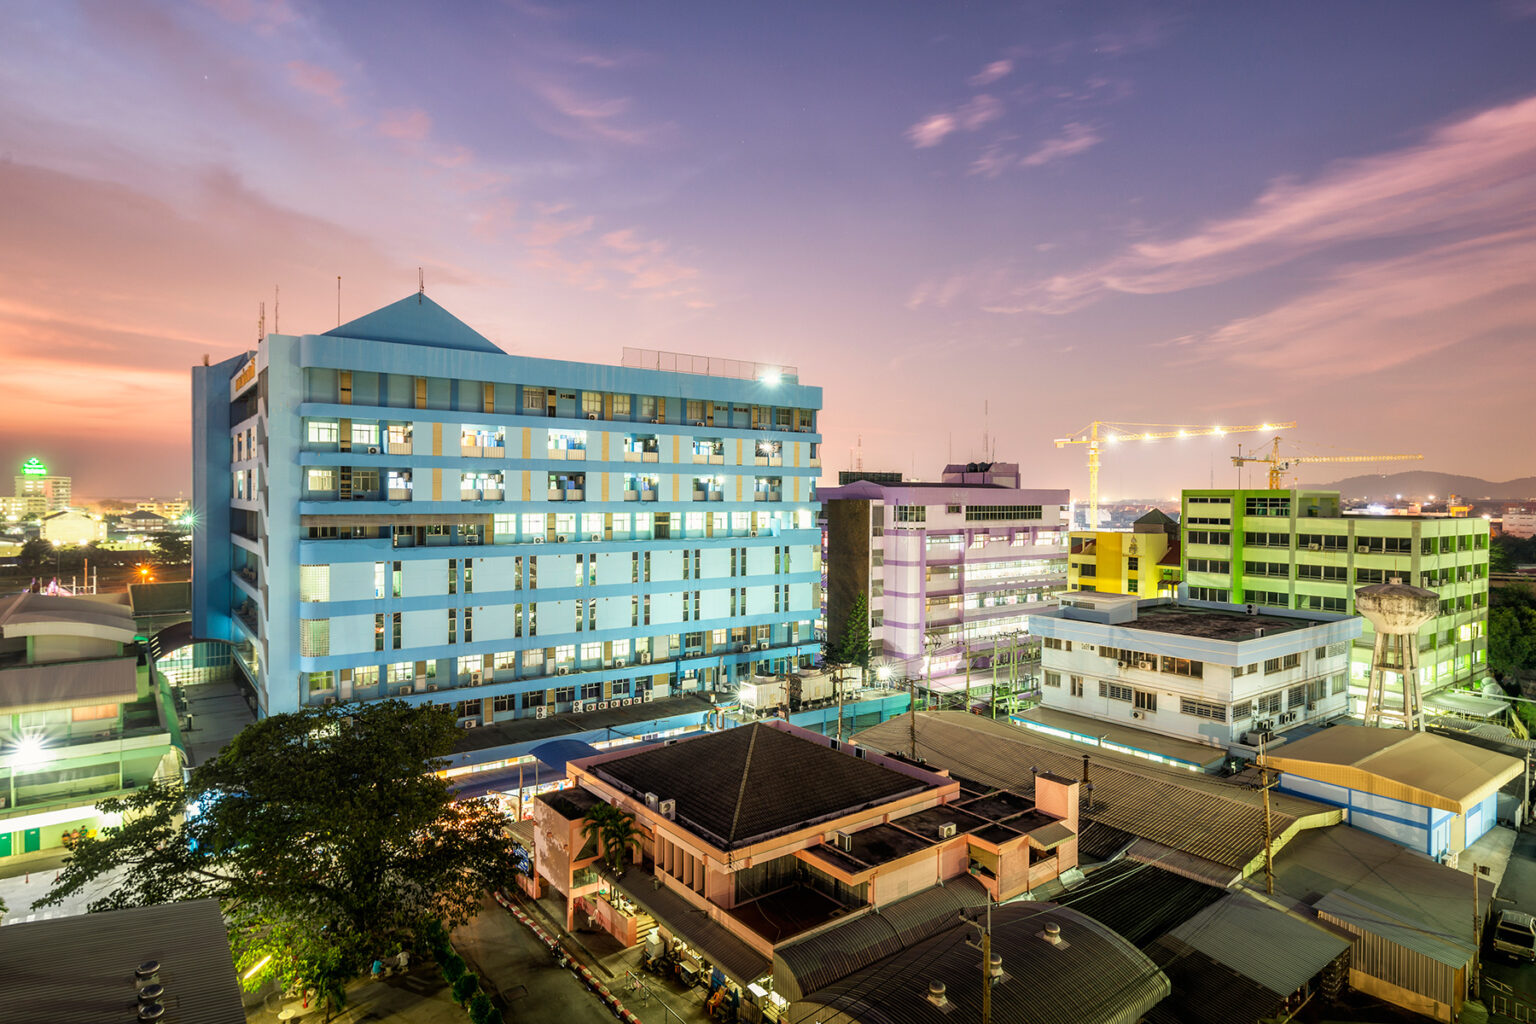 View of a hospital in Thailand at night